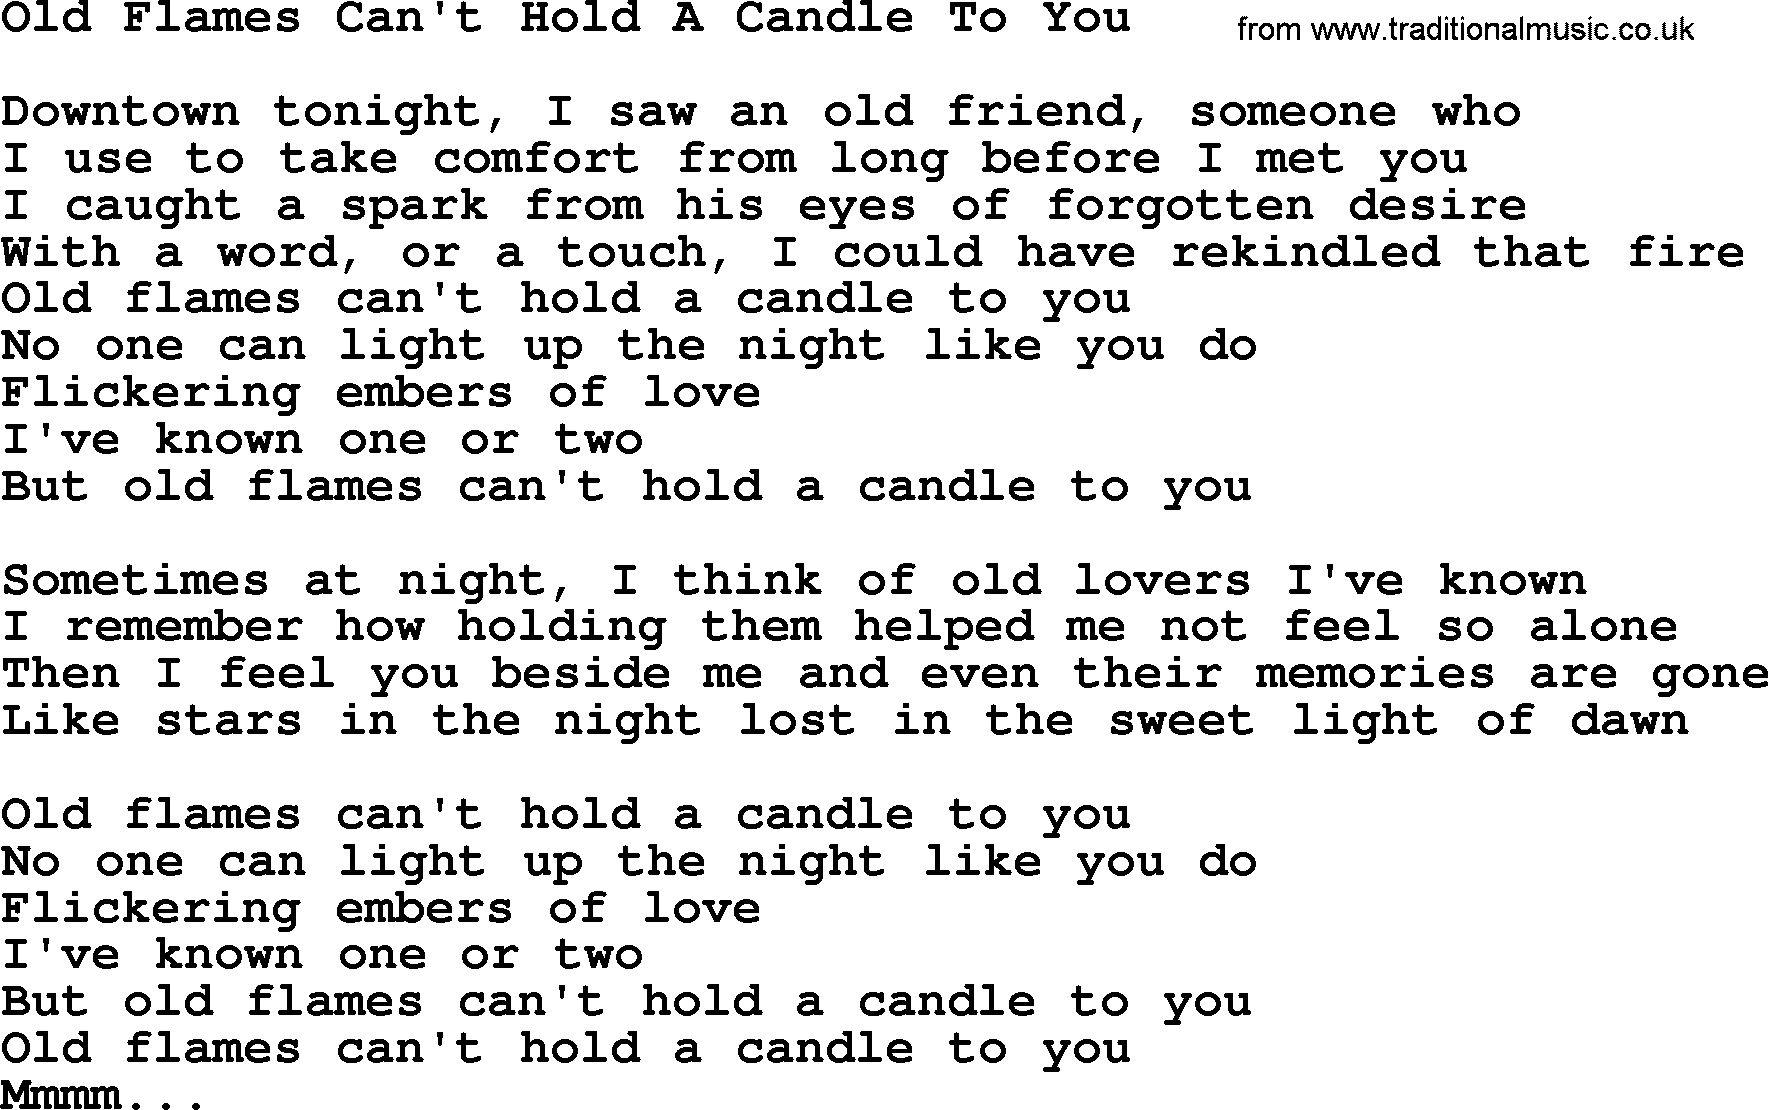 Dolly Parton song Old Flames Can't Hold A Candle To You.txt lyrics